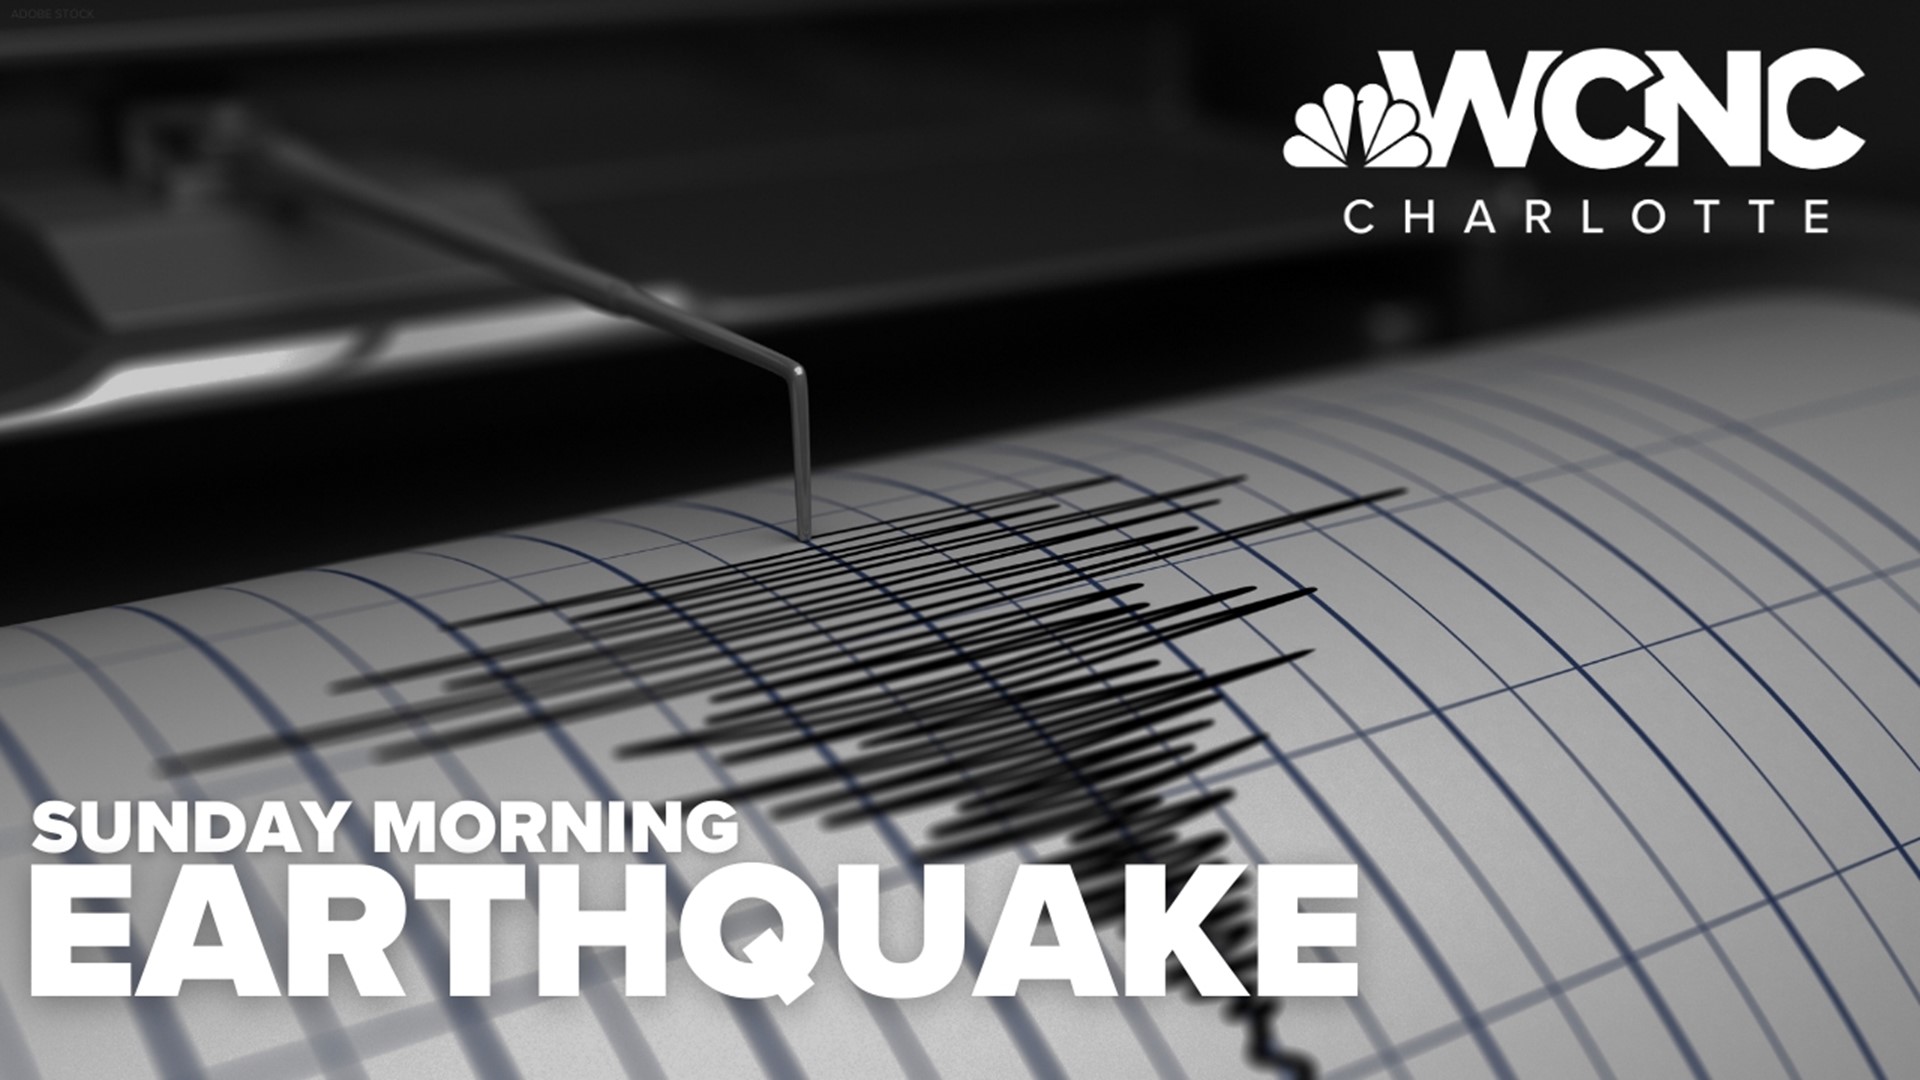 The 3.2 magnitude earthquake was registered at 6:09 a.m.